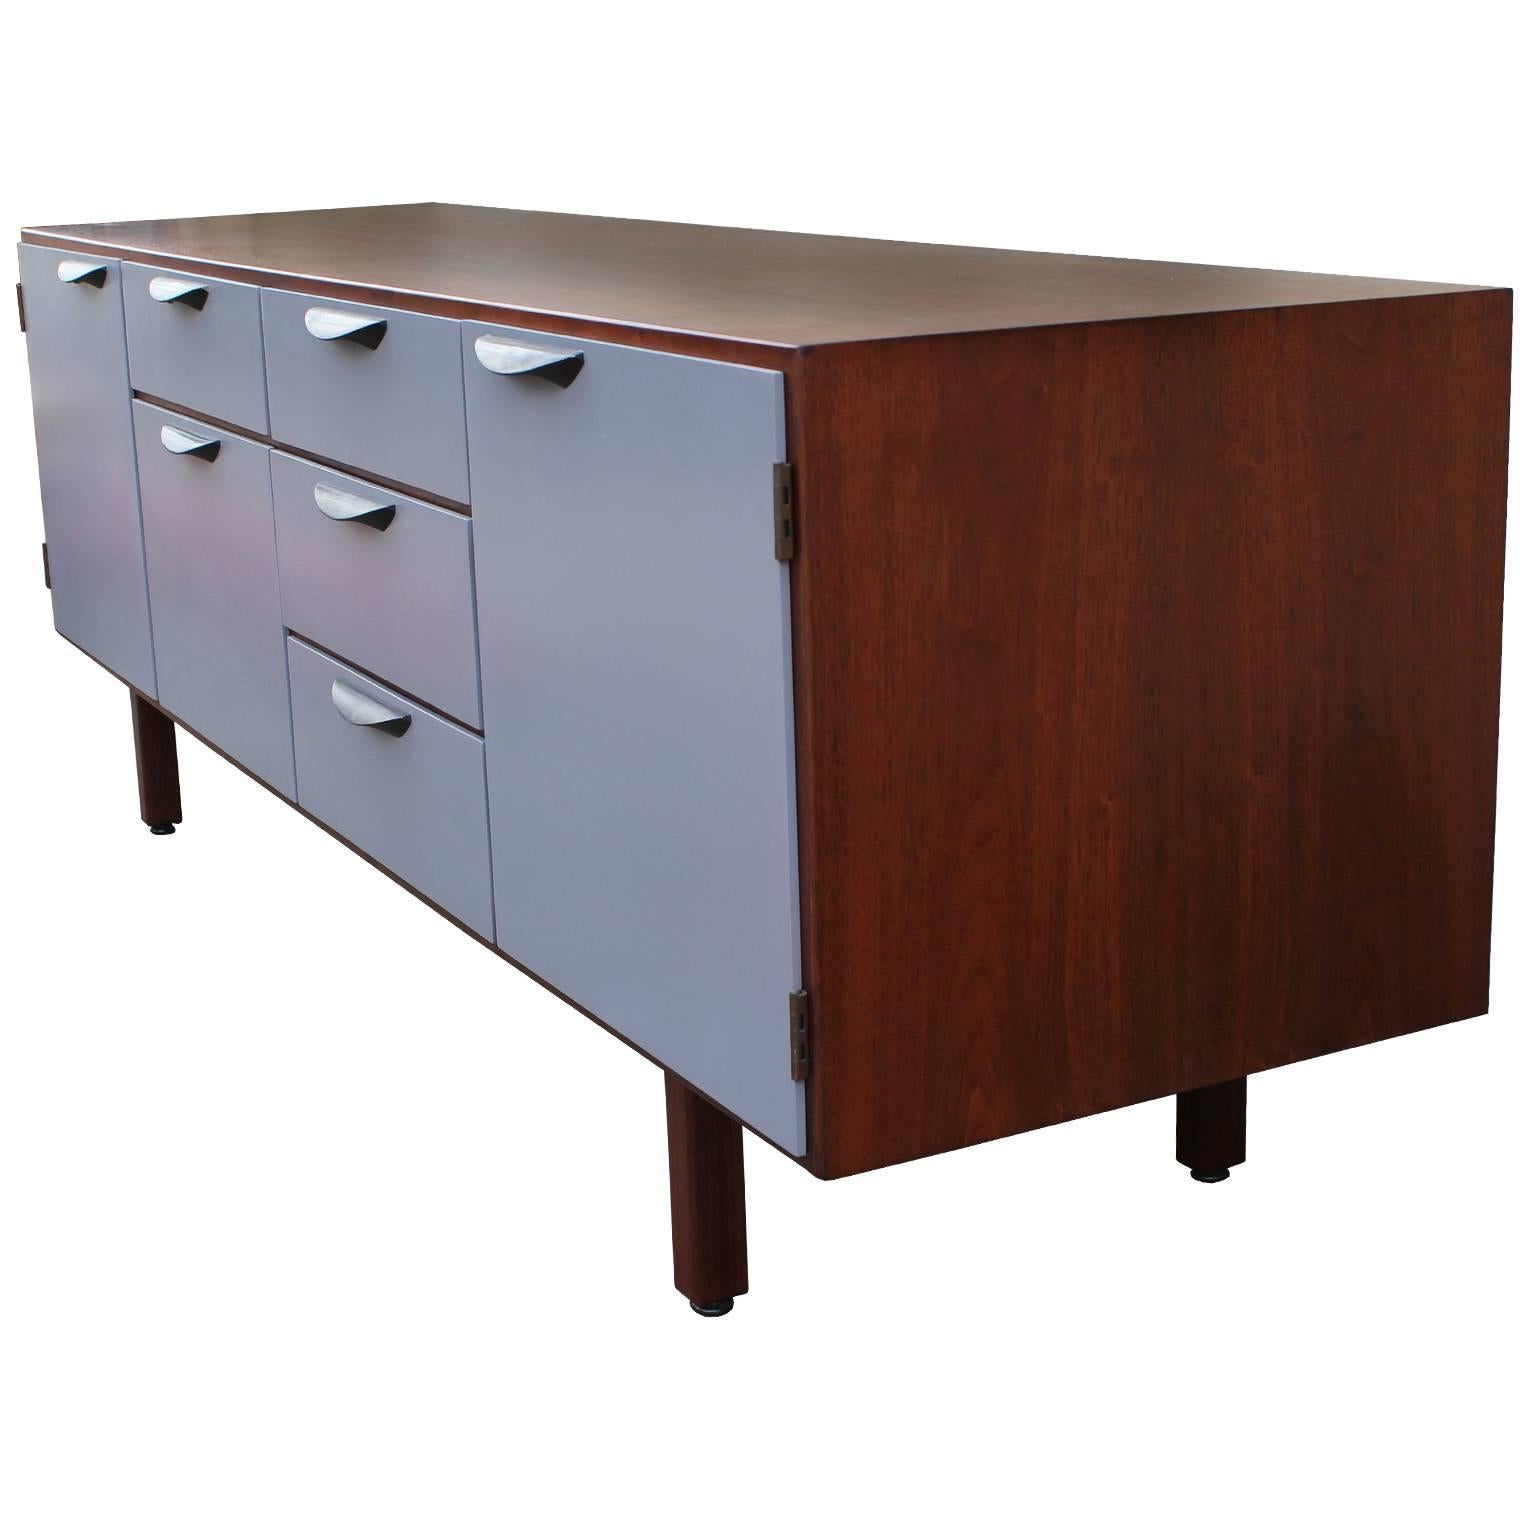 Excellent sideboard or credenza designed by Jens Risom. Drawers are finished in a smooth grey lacquer while the case is finished in a medium walnut. Walnut has beautiful graining. Aluminum hinges and pulls. Pulls are finished in a black aluminum